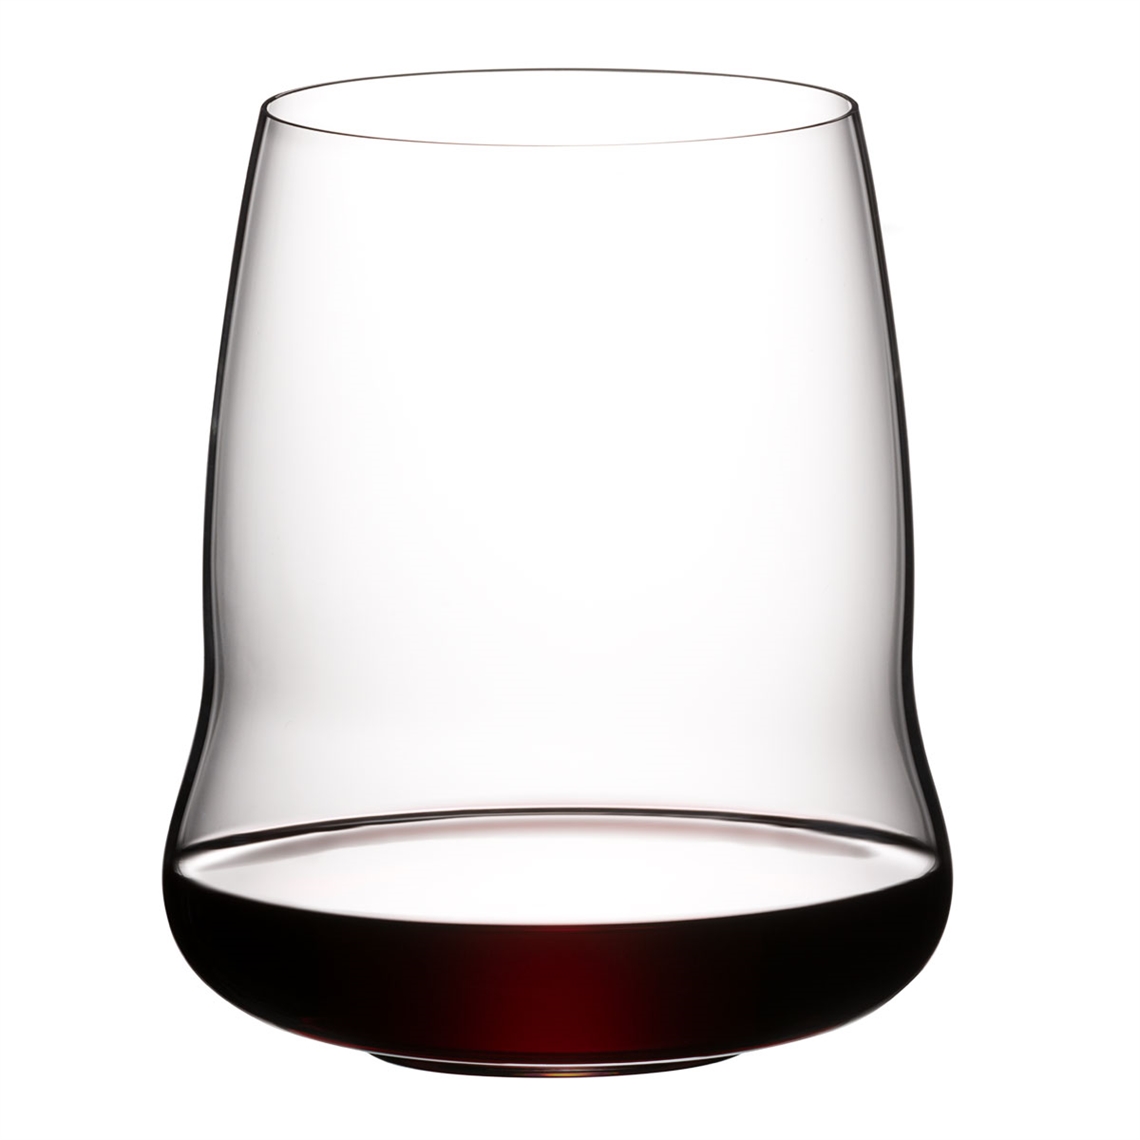 Riedel Stemless Wings Cabernet Sauvignon Glass - Set of 2 - 6789/0 